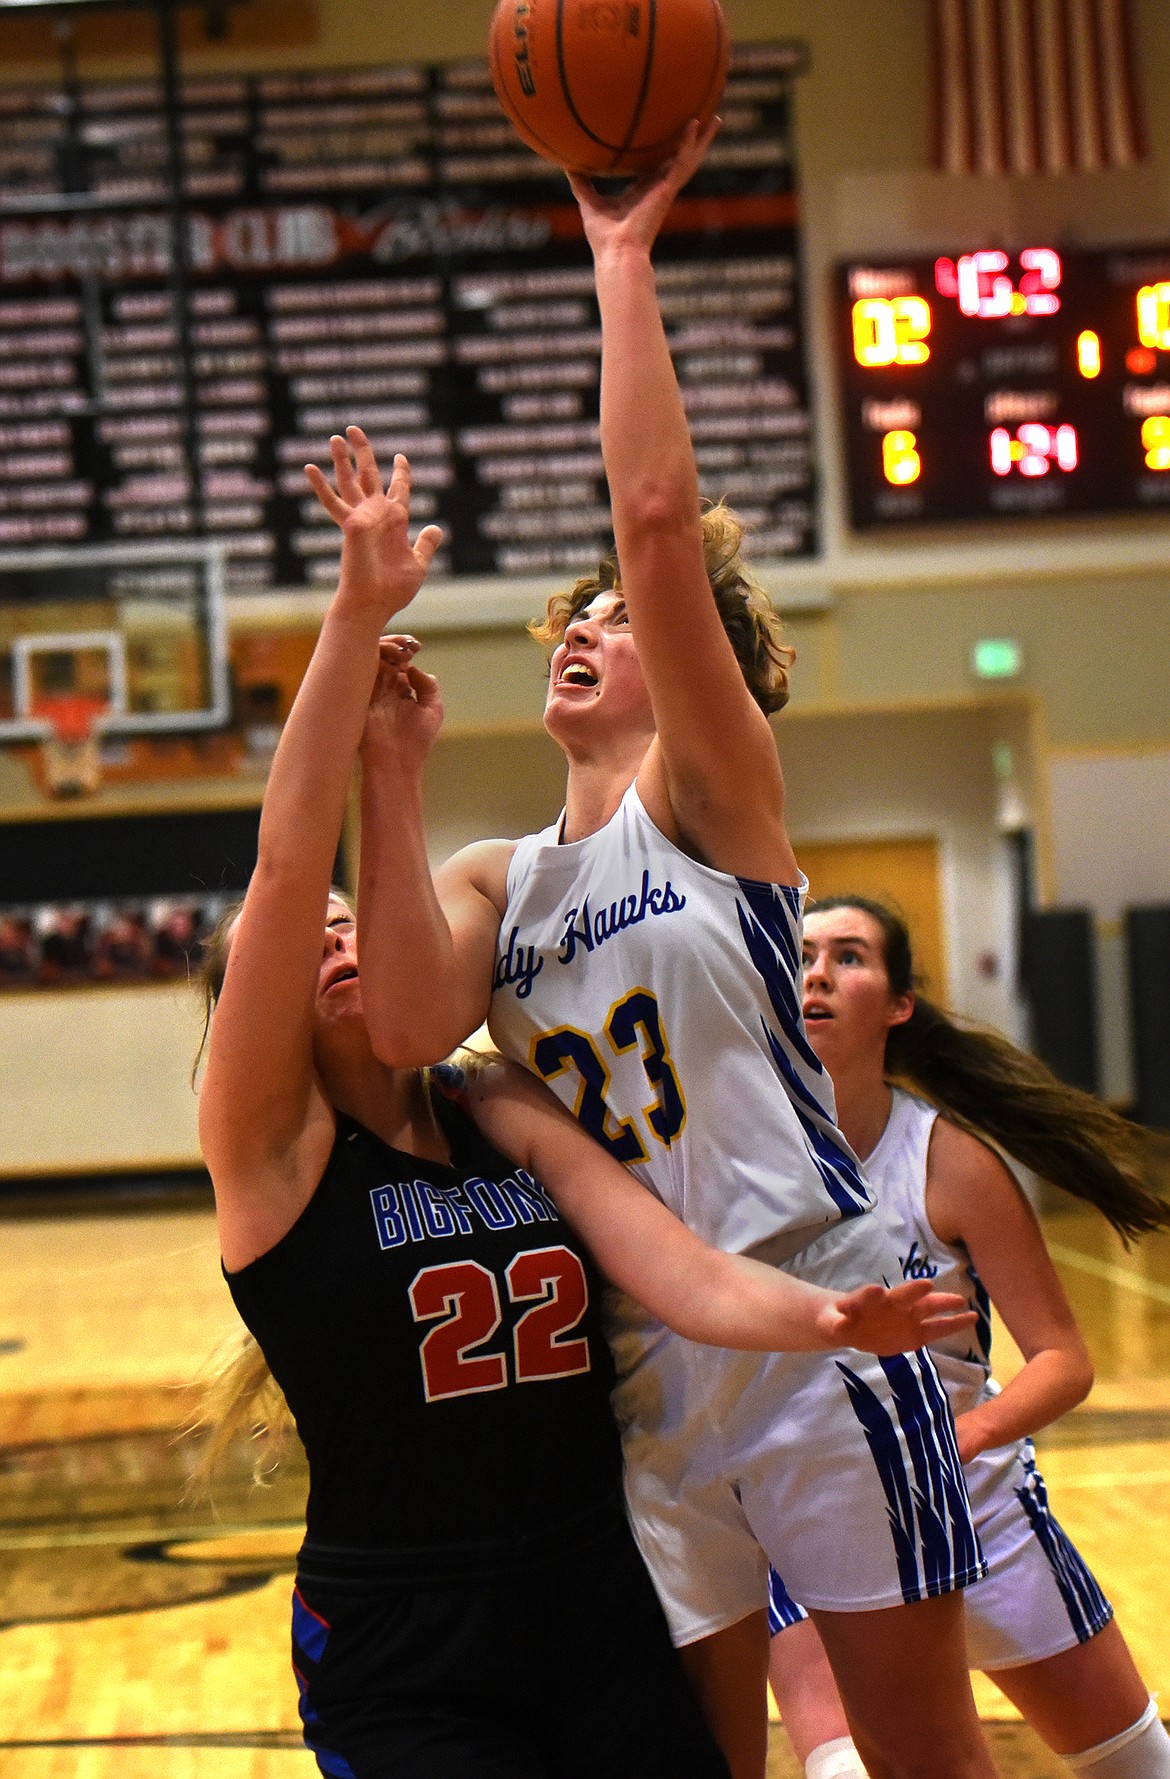 Jody Detlaff takes the ball up for Thompson Falls against Bigfork defender Scout Nadeau.